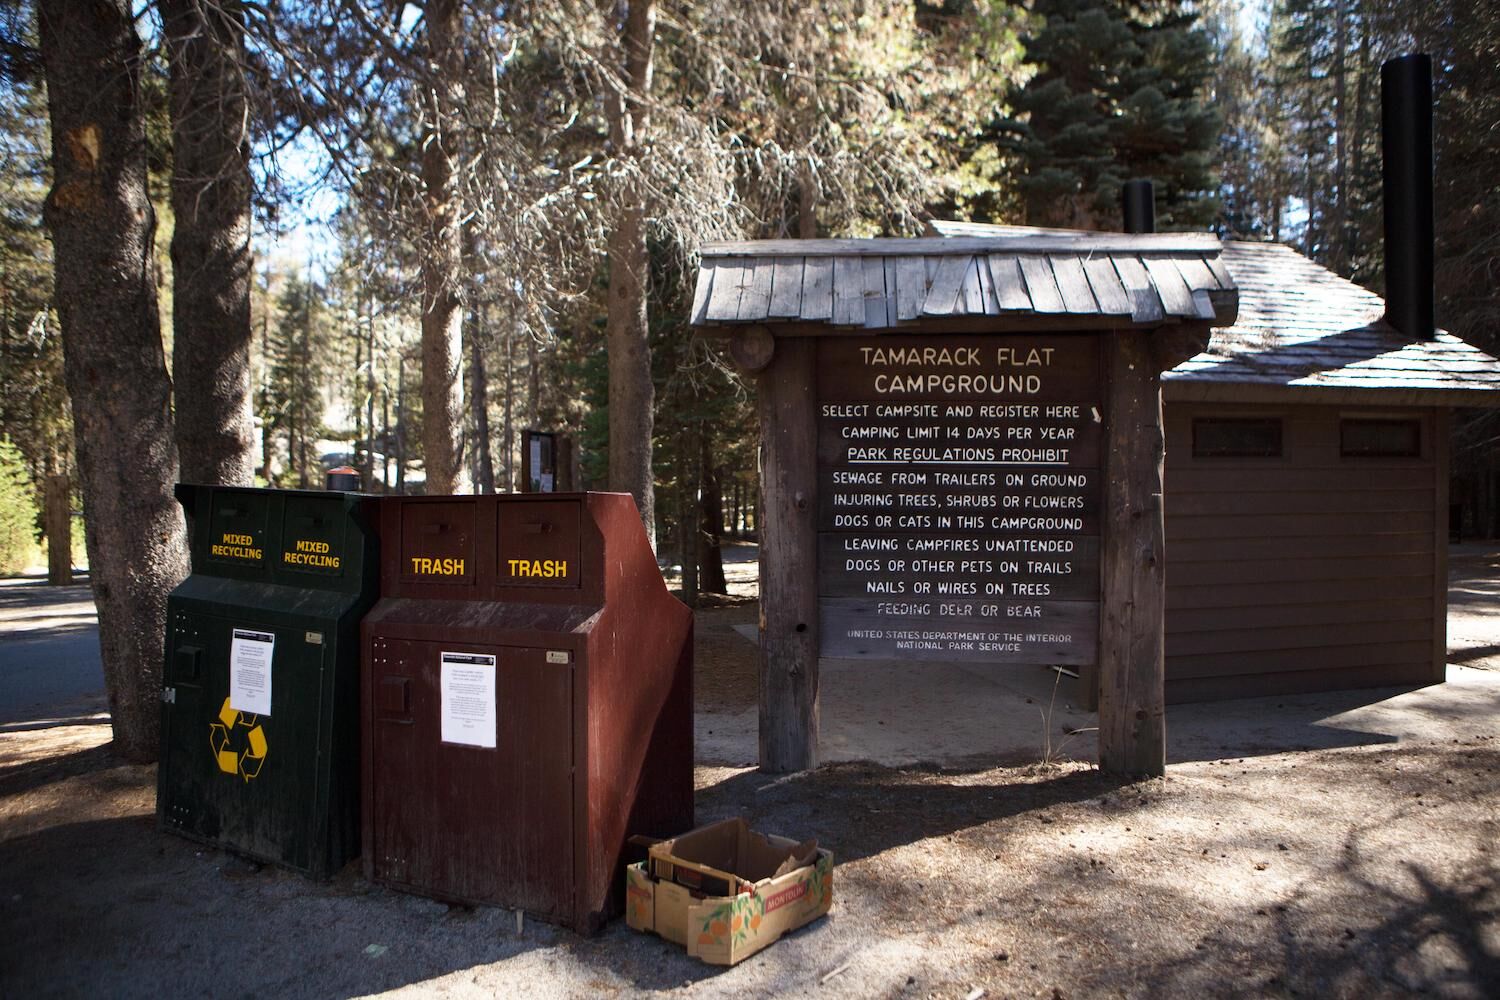 National Park Service Trash How to Clean Eco-Friendly Backpacking Tips